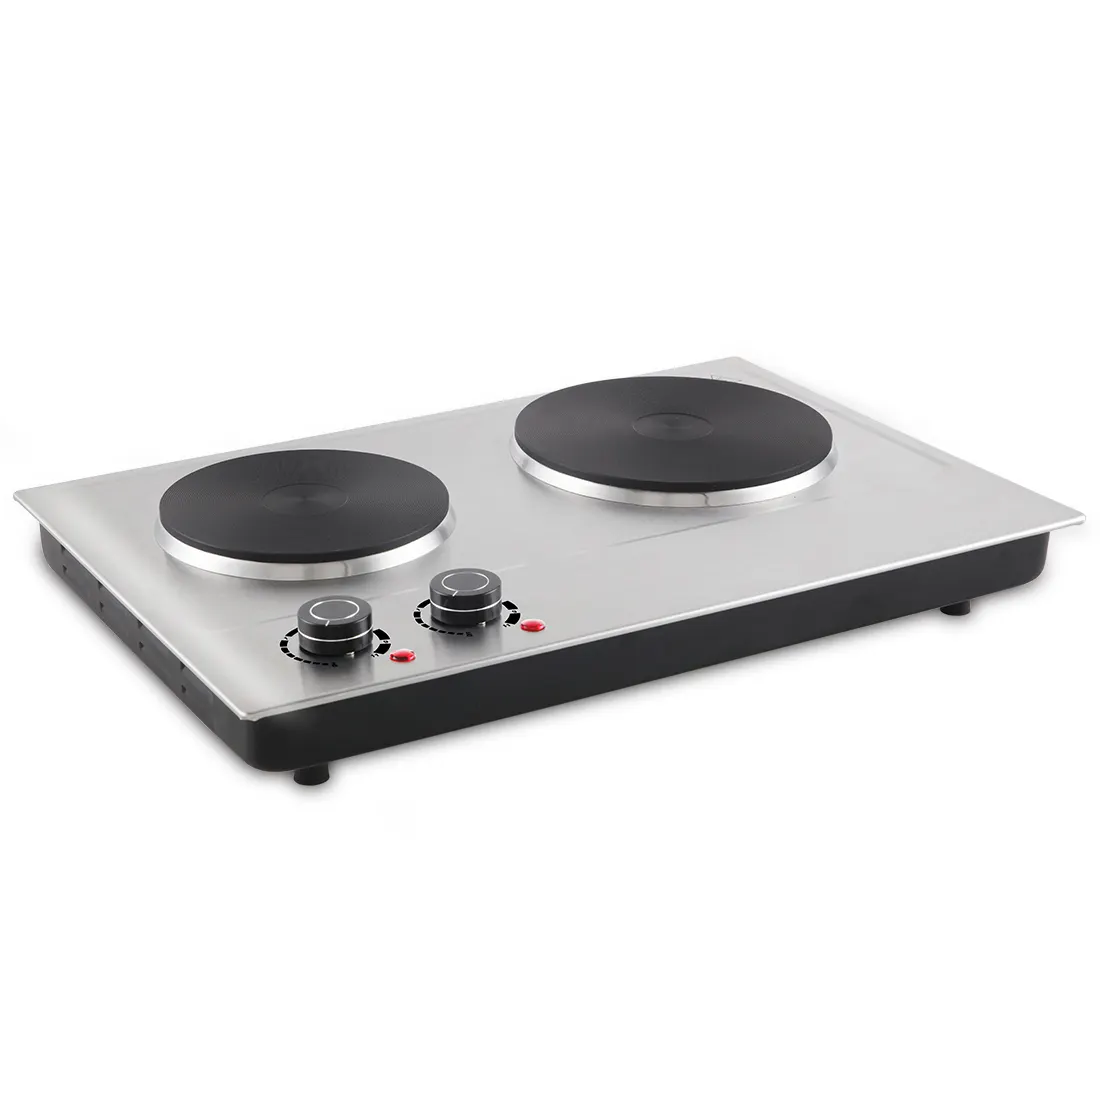 kitchen hotplate cooking stove double burner electric cookers hot plates for cooking electric